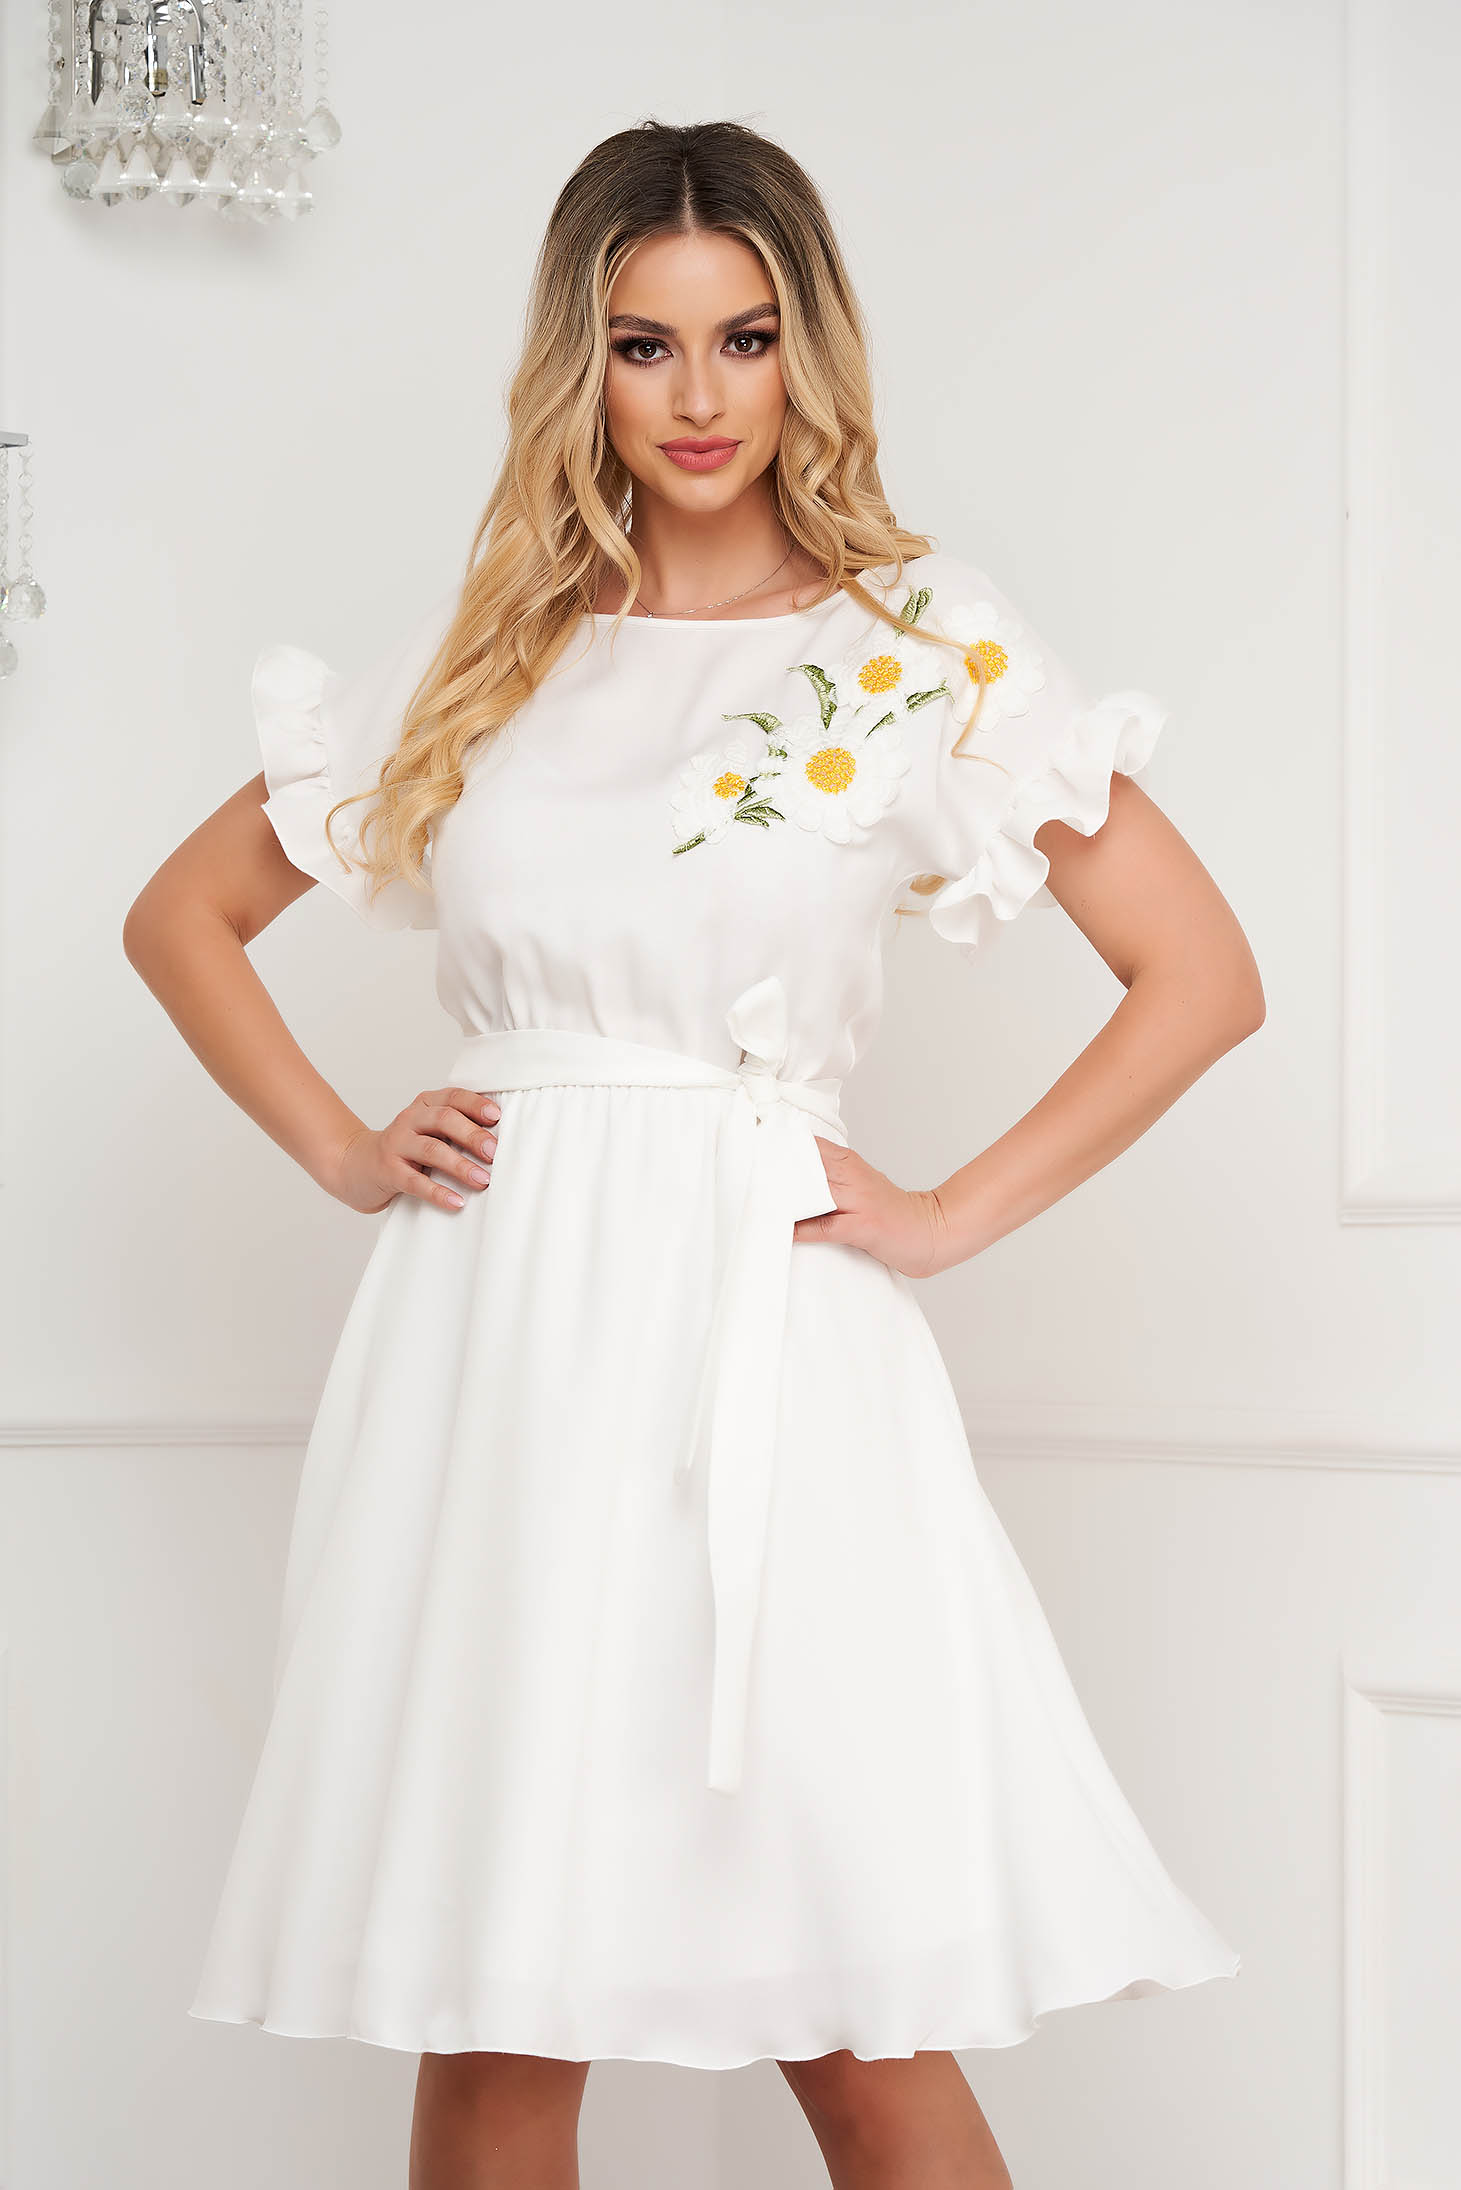 Midi white dress made of stretchy material, A-line cut with ruffles on the sleeves and unique floral embroidery - StarShinerS 1 - StarShinerS.com